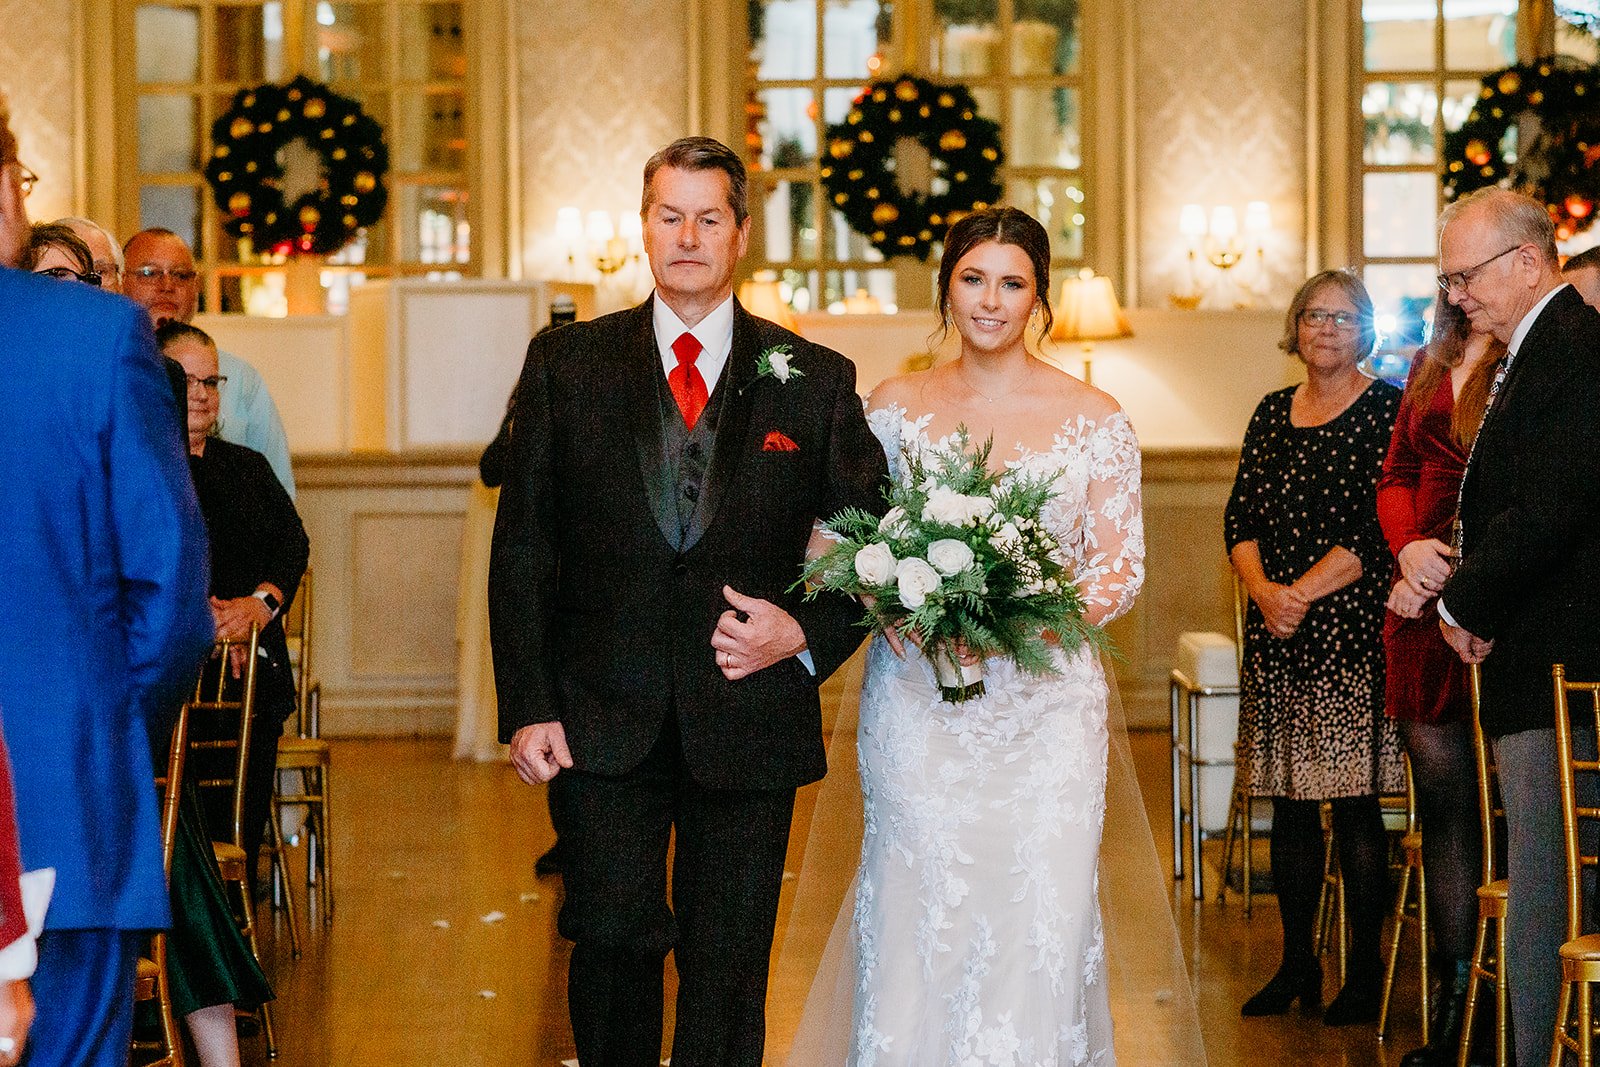 father walks winter bride down aisle for ceremony at the Franklin Plaza